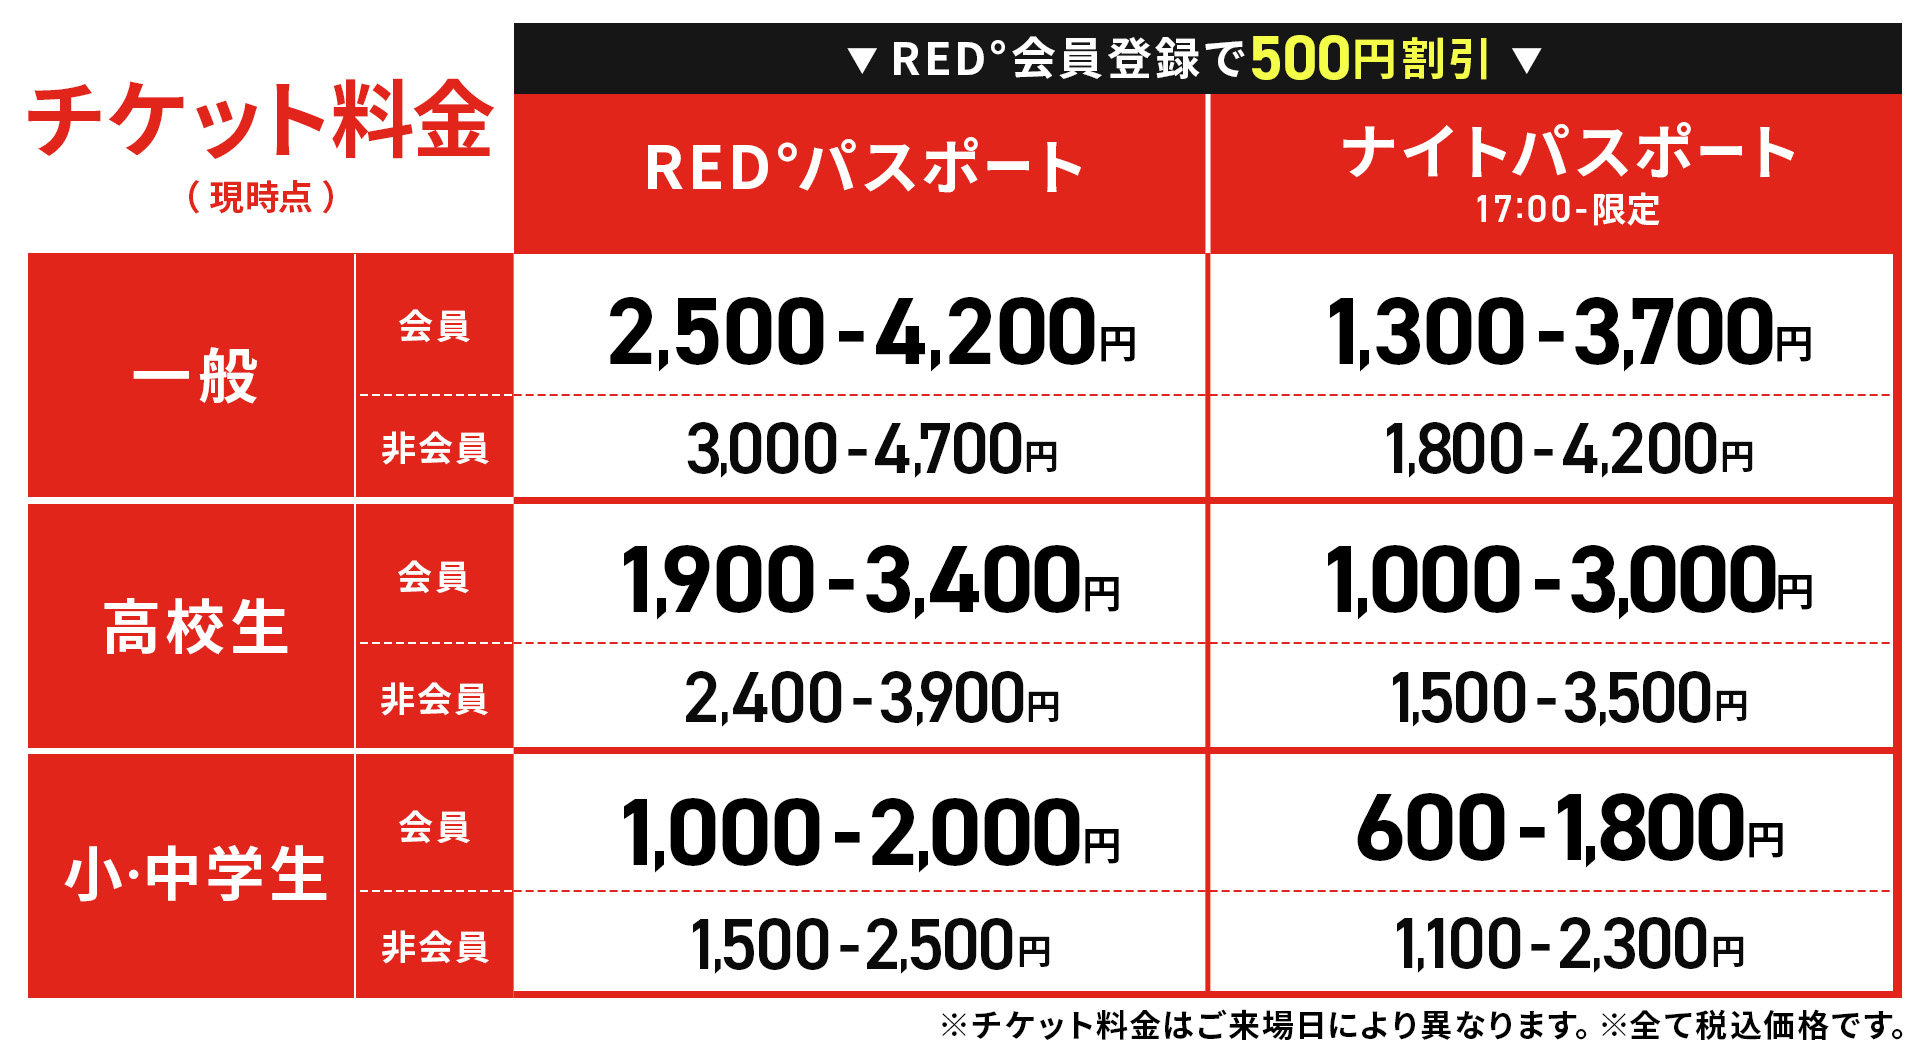 TICKETS | RED° TOKYO TOWER OFFICIAL WEBSITE